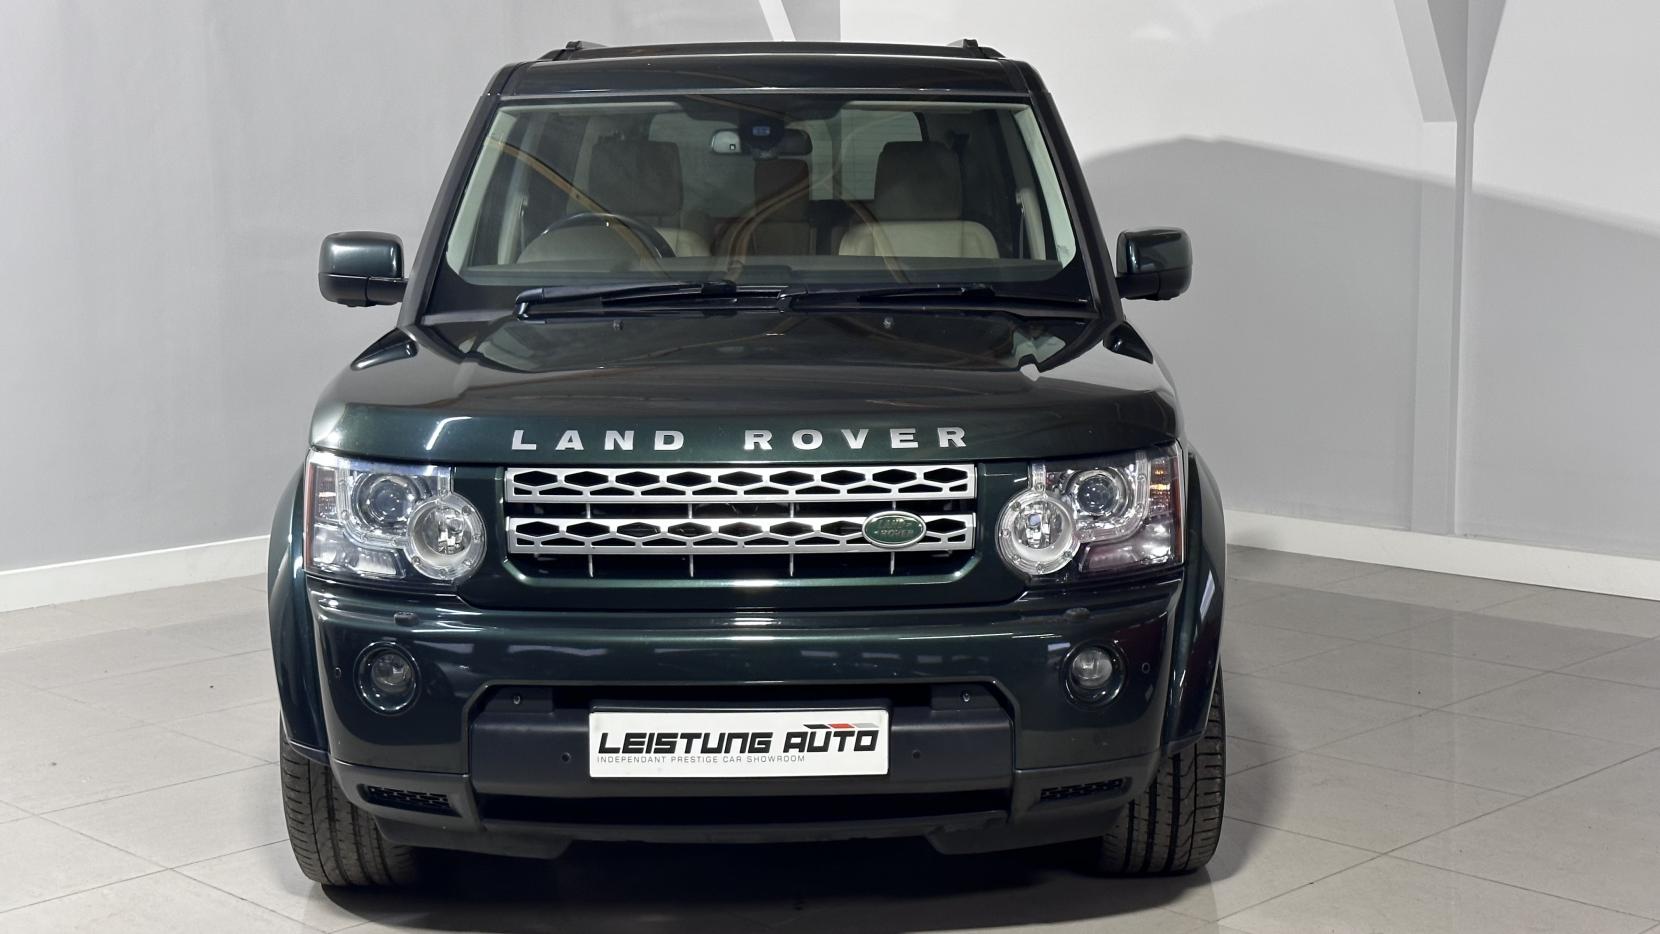 Land Rover Discovery 4 3.0 TD V6 HSE SUV 5dr Diesel Auto 4WD Euro 4 (245 ps)